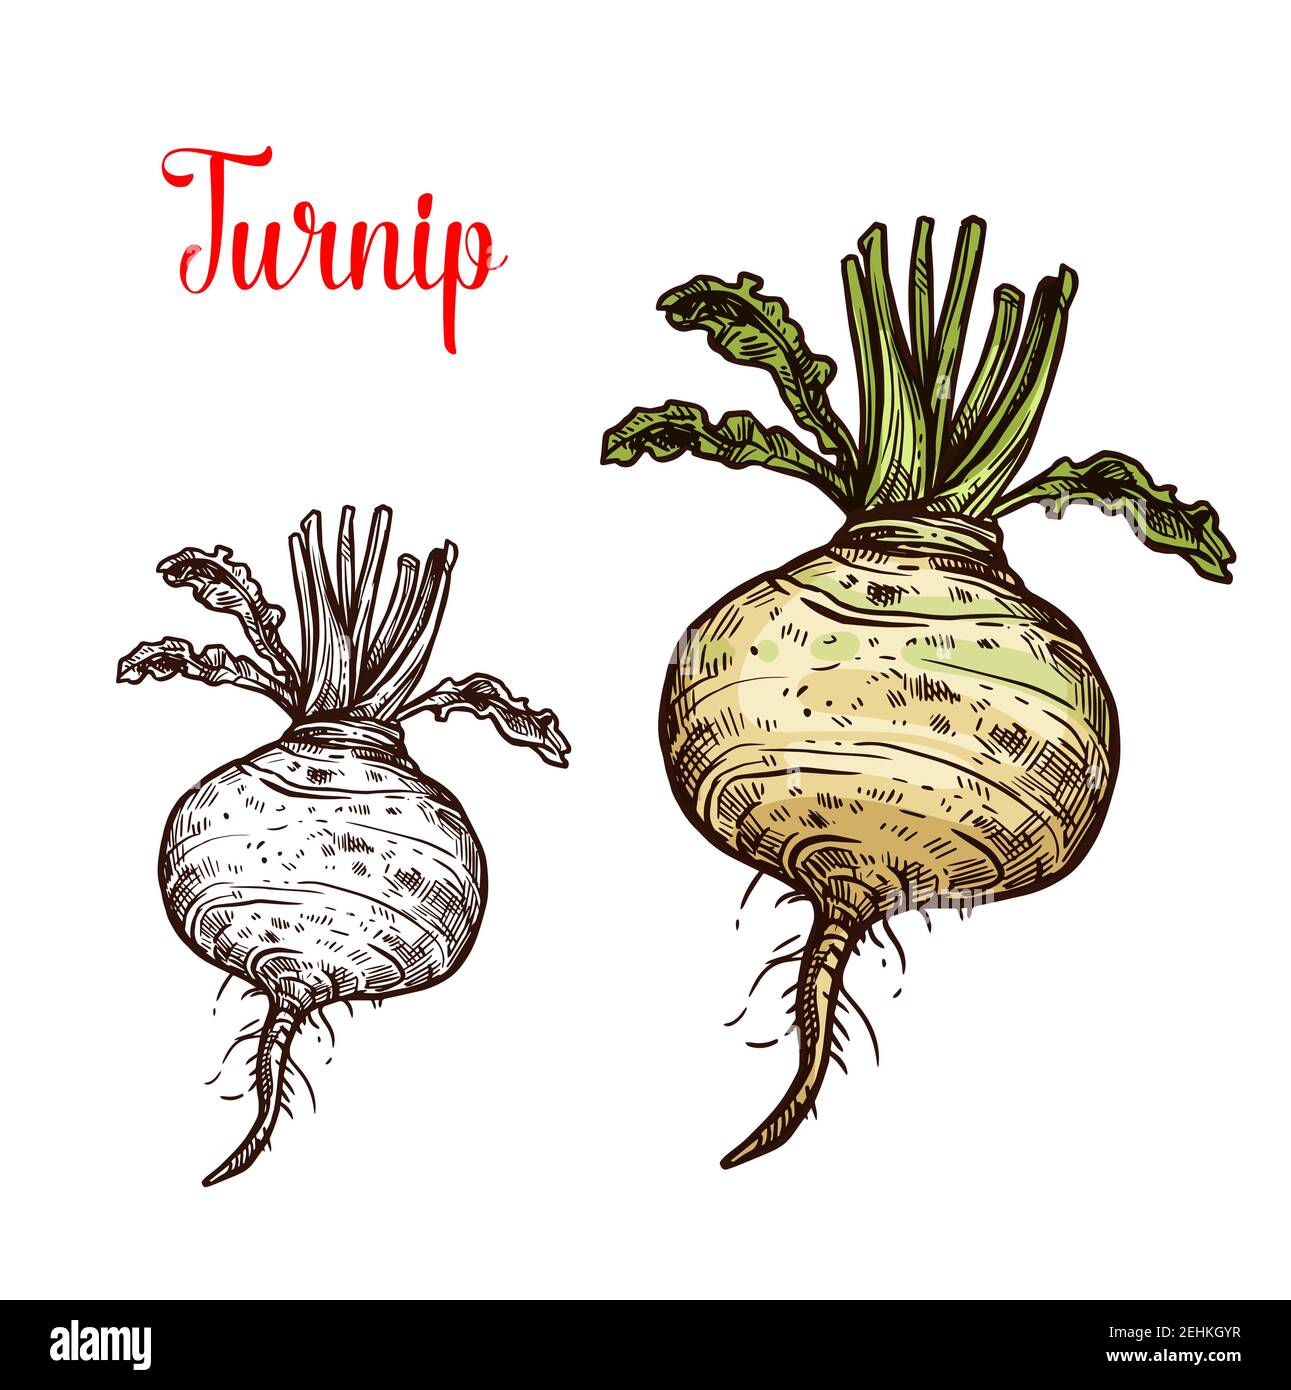 Turnip Drawing Illustrations Images  Free Photos PNG Stickers Wallpapers   Backgrounds  rawpixel